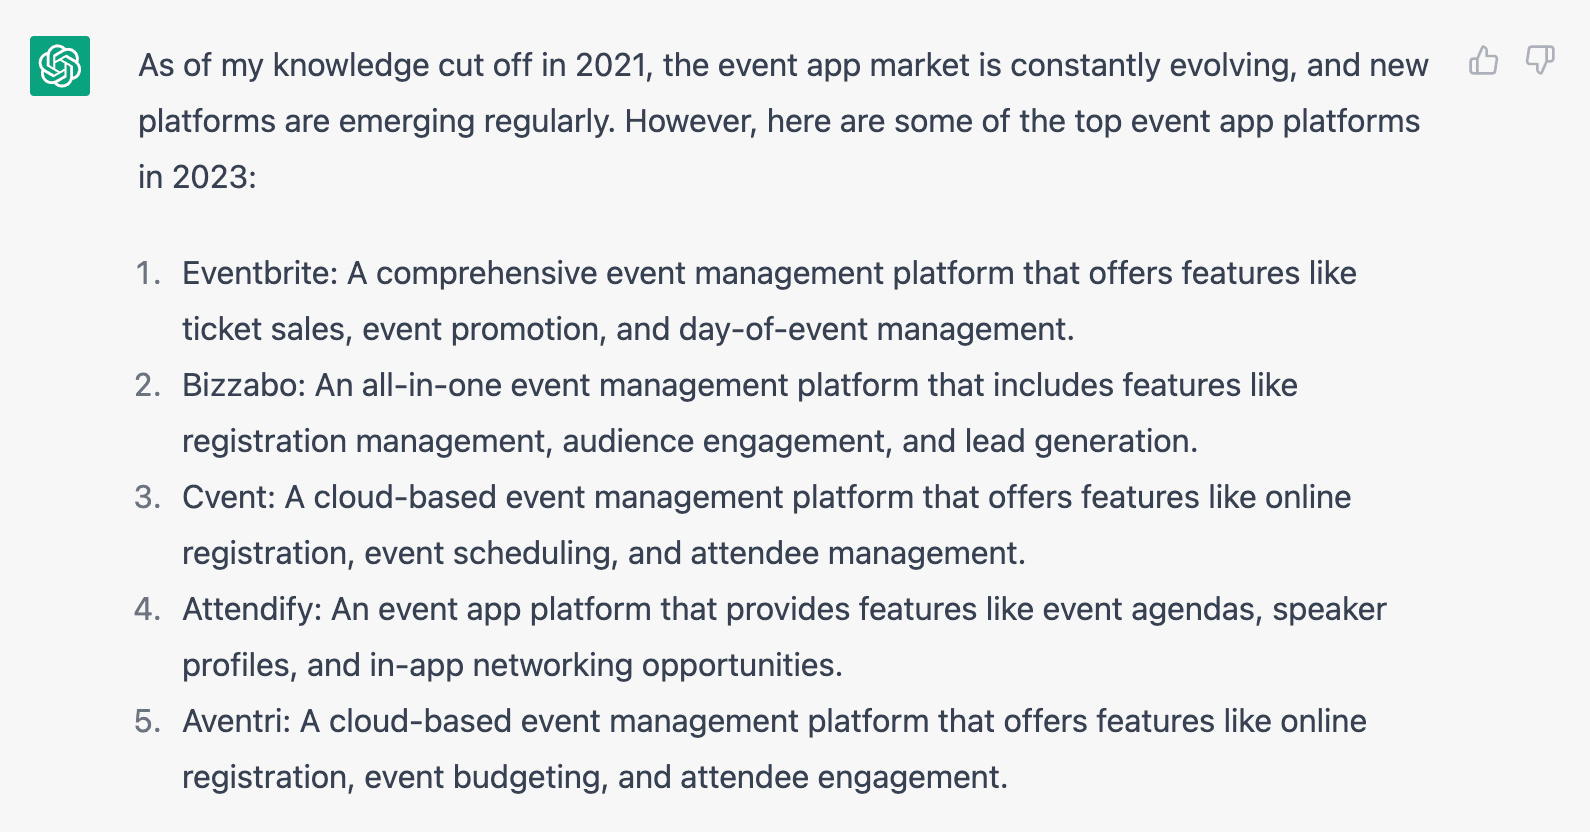 ChatGPT response for top 5 event app companies